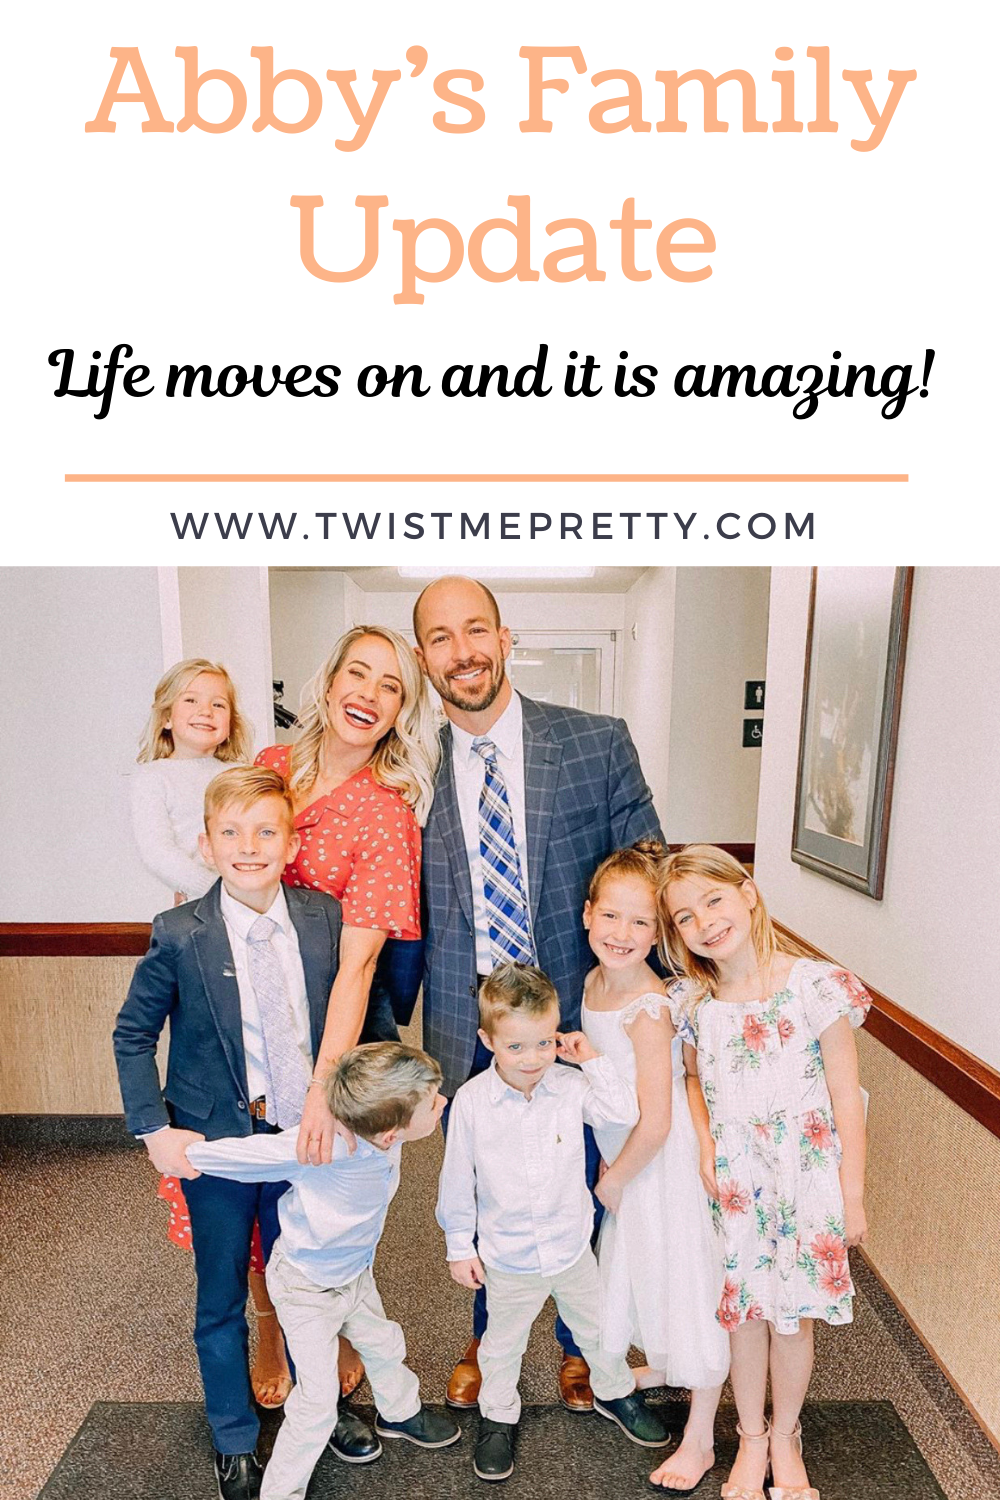 Abby's Family Update: Life moves on and it is amazing! www.TwistMePretty.com